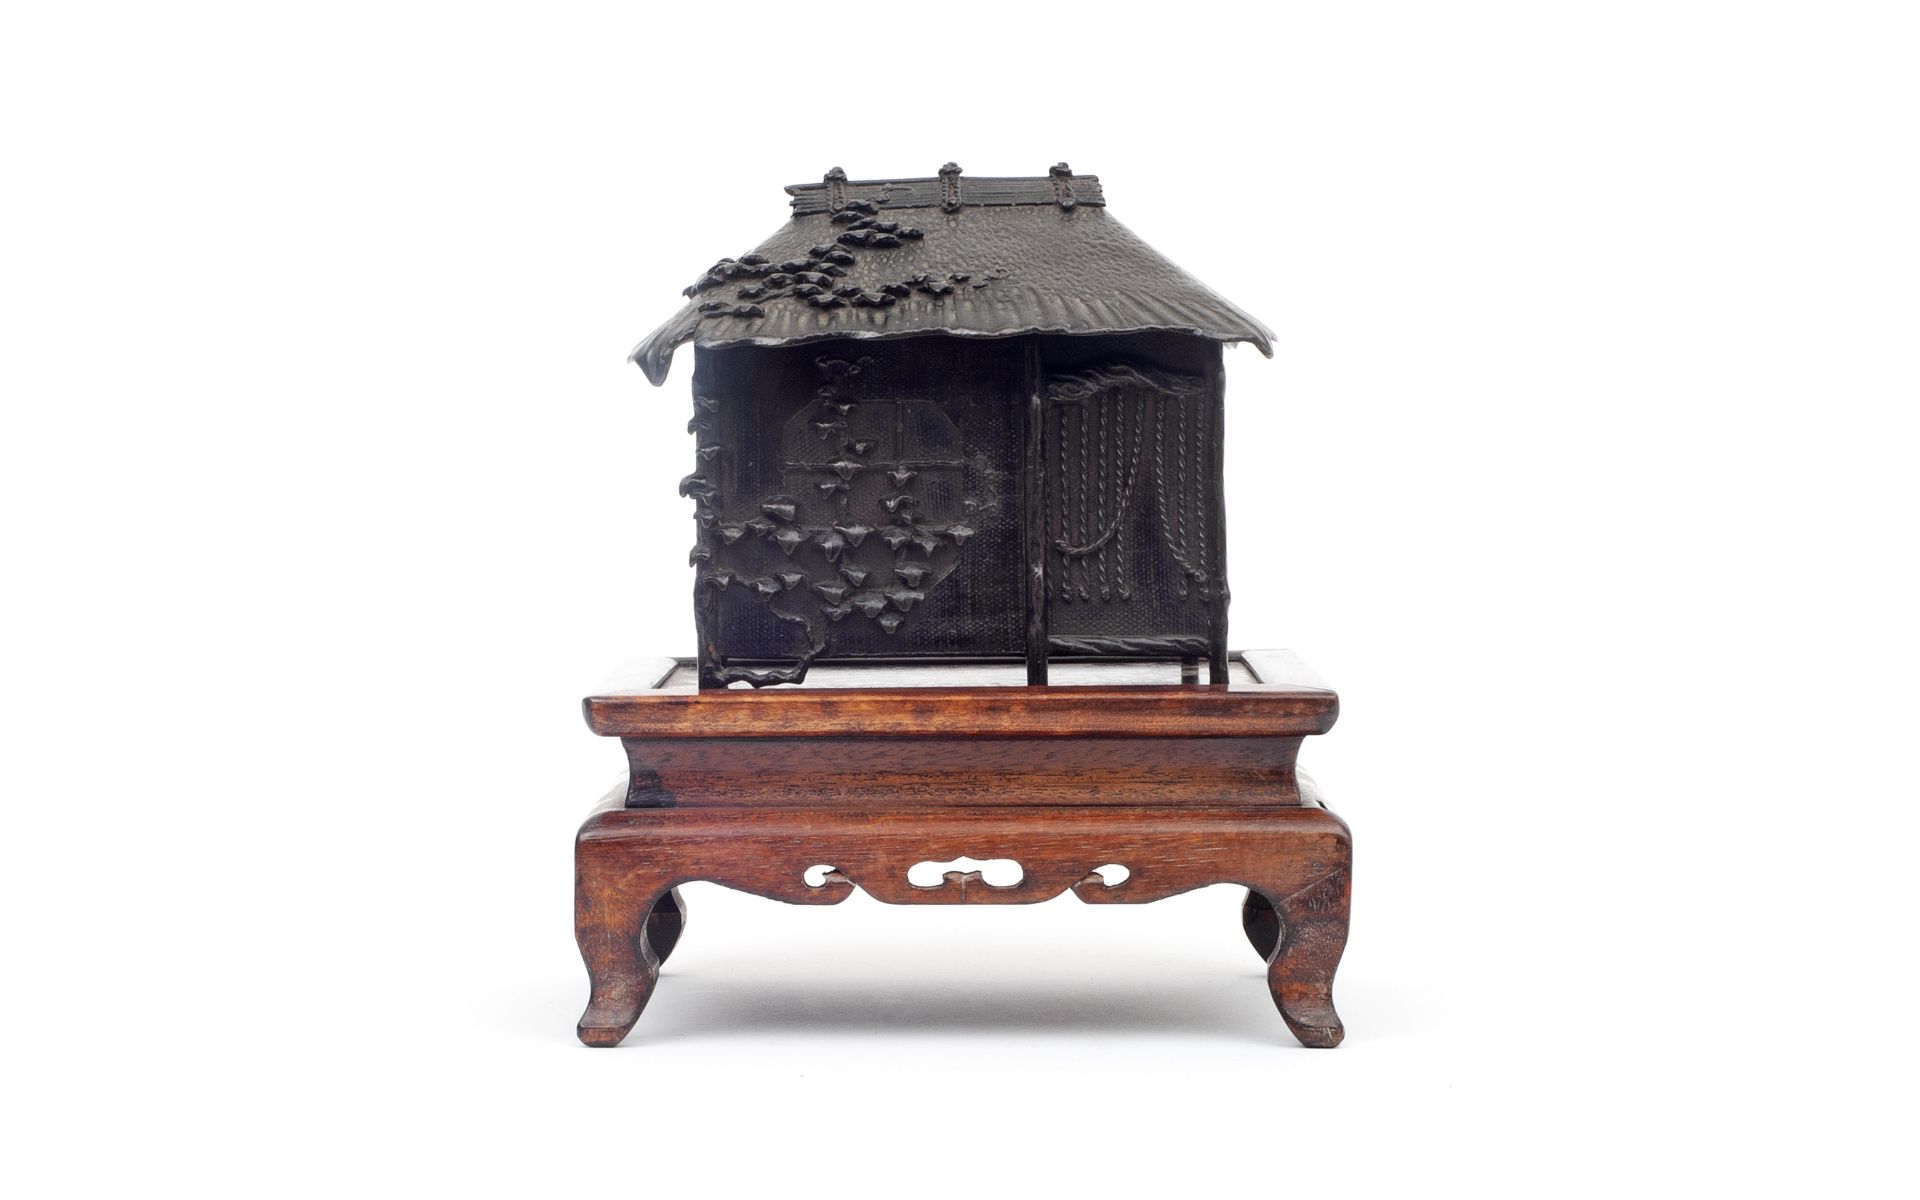 A JAPANESE MEIJI PERIOD BRONZE BOX MODELLED AS A HOUSE - Image 2 of 4